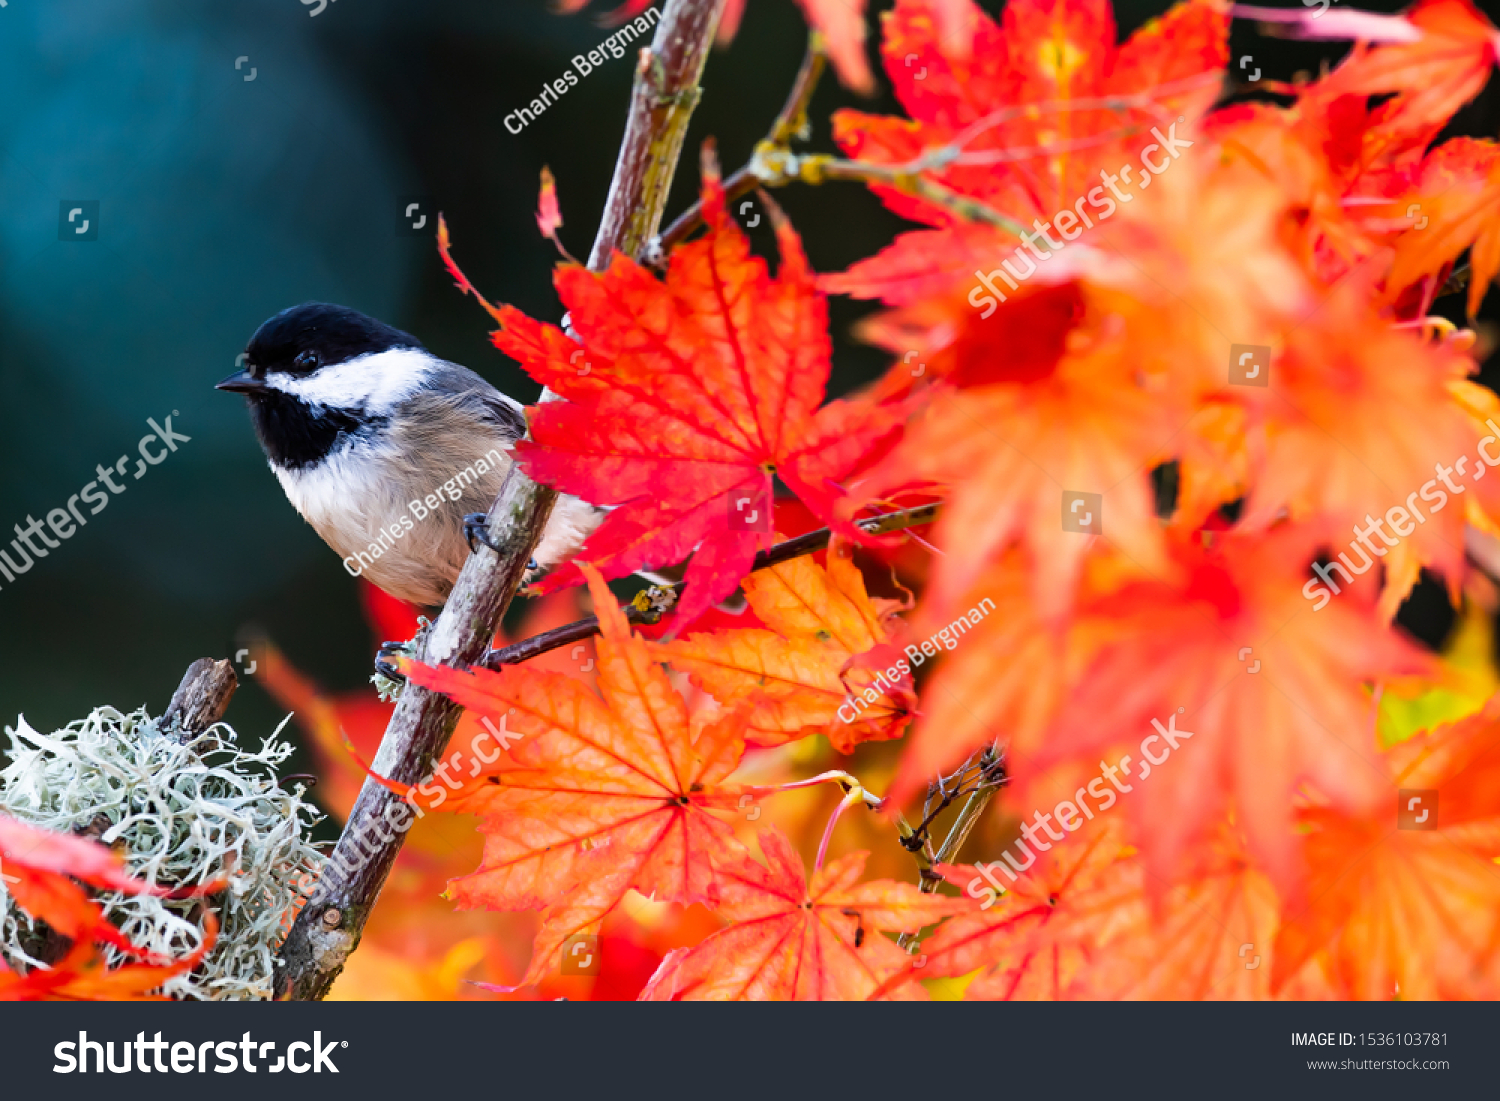 A Black-capped Chickadee announces autumn's arrival in a fiery orange maple tree.  Favorite backyard birds across America, Chickadees have a lilting song, bouncy flight, and endearing markings. #1536103781